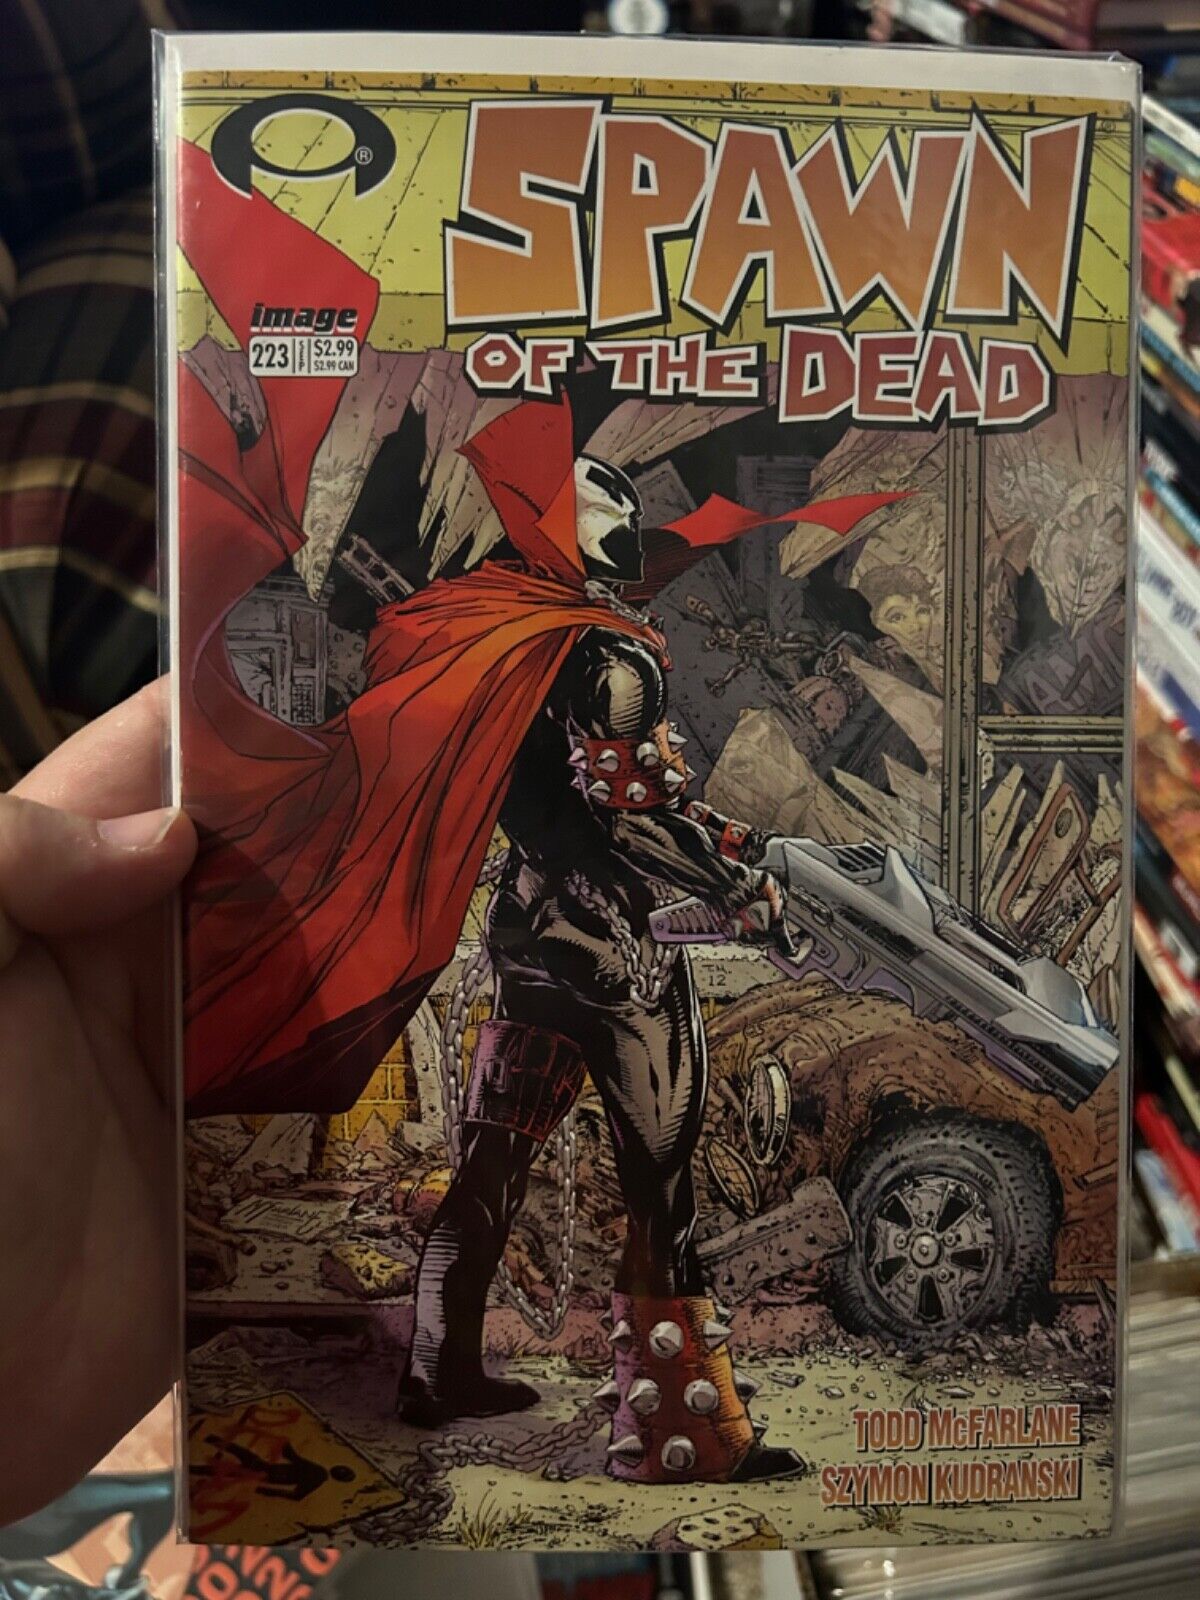 Spawn of the Dead 223 Walking Dead homage cover swipe Spawn 223